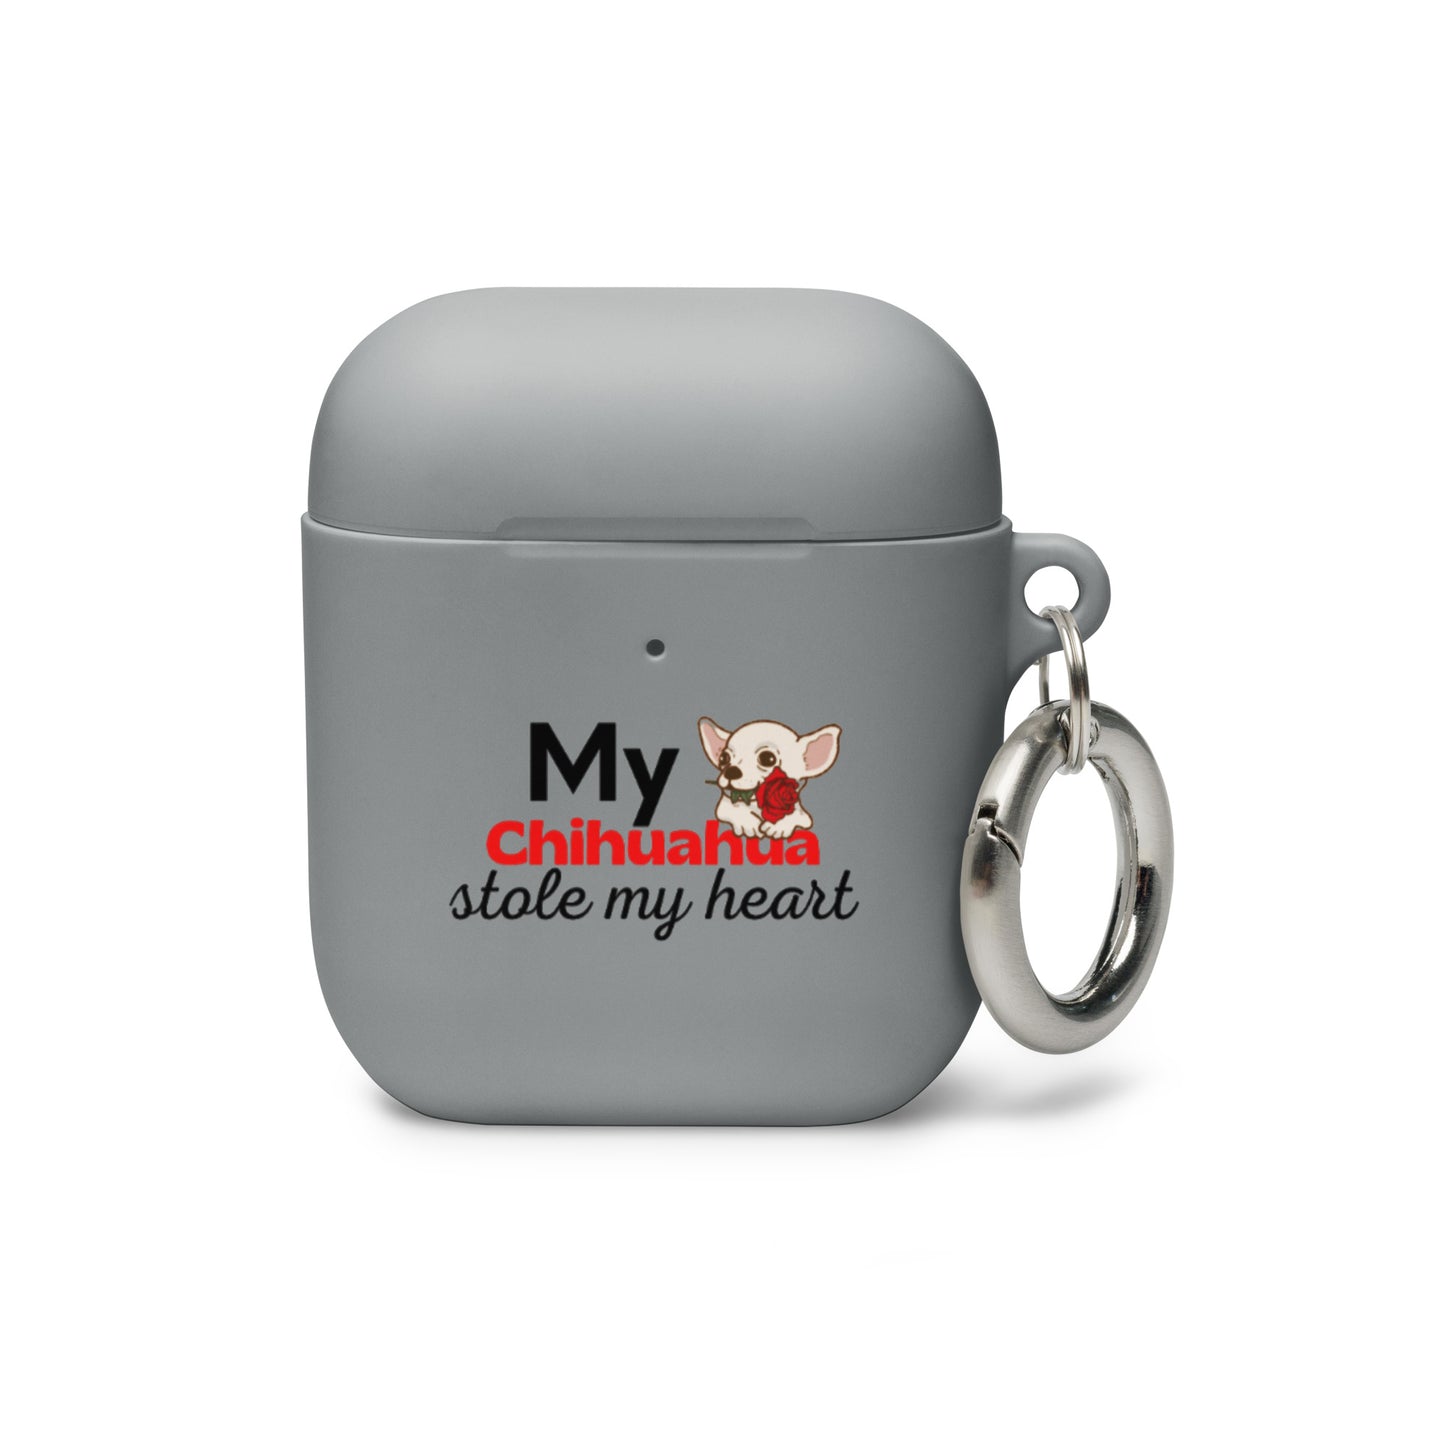 AirPods case 'My Chihuahua stole my heart'